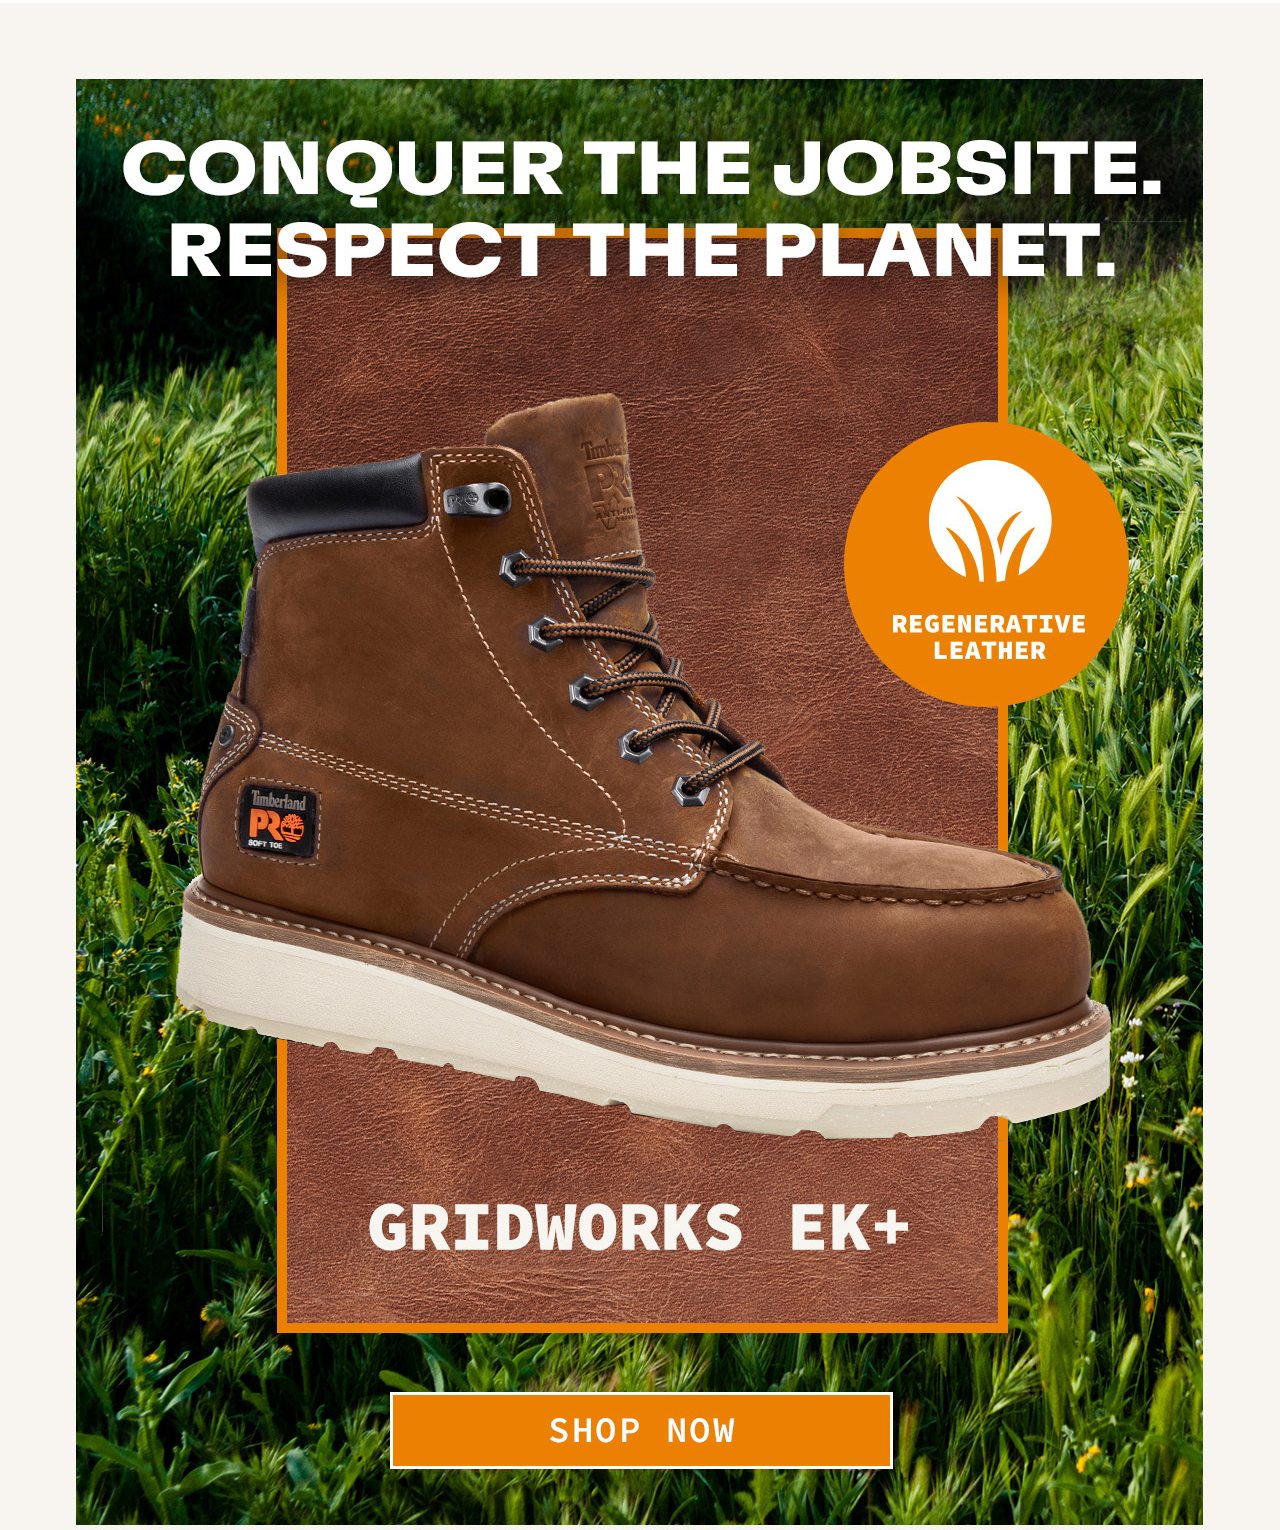 Conquer The Jobsite. Respect The Planet. SHOP NOW